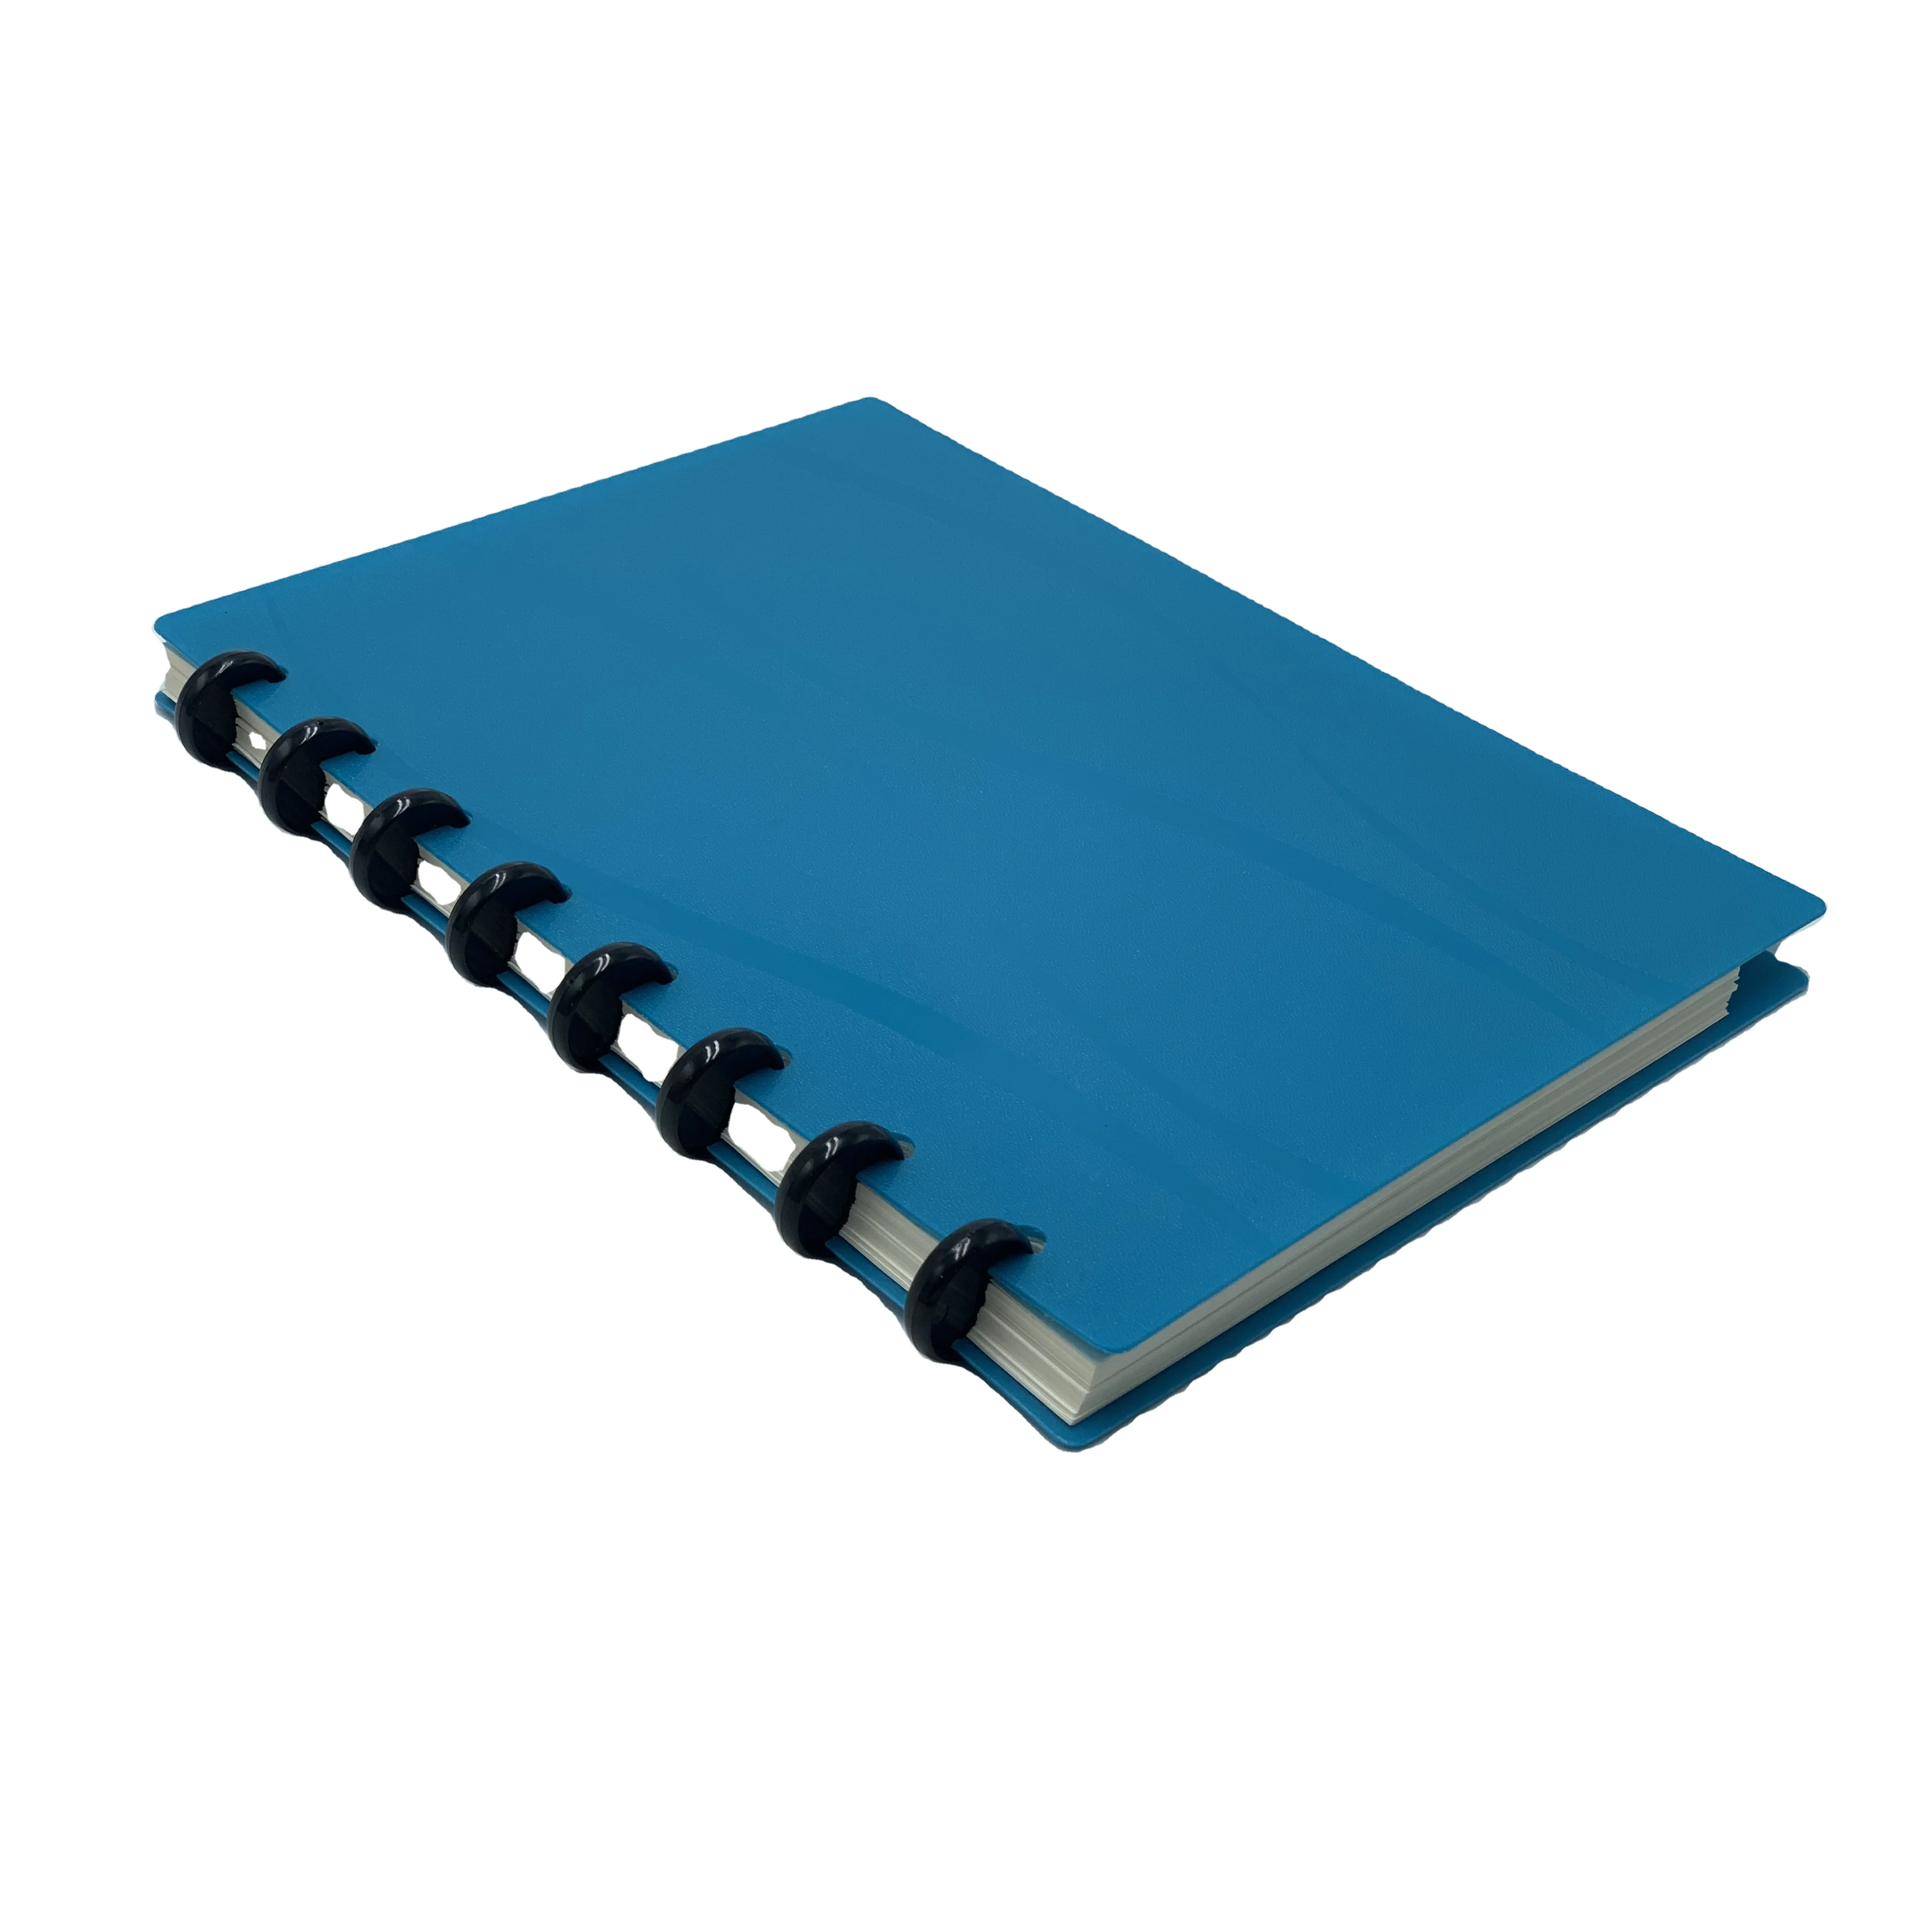 Plastic cover notebook for student and office